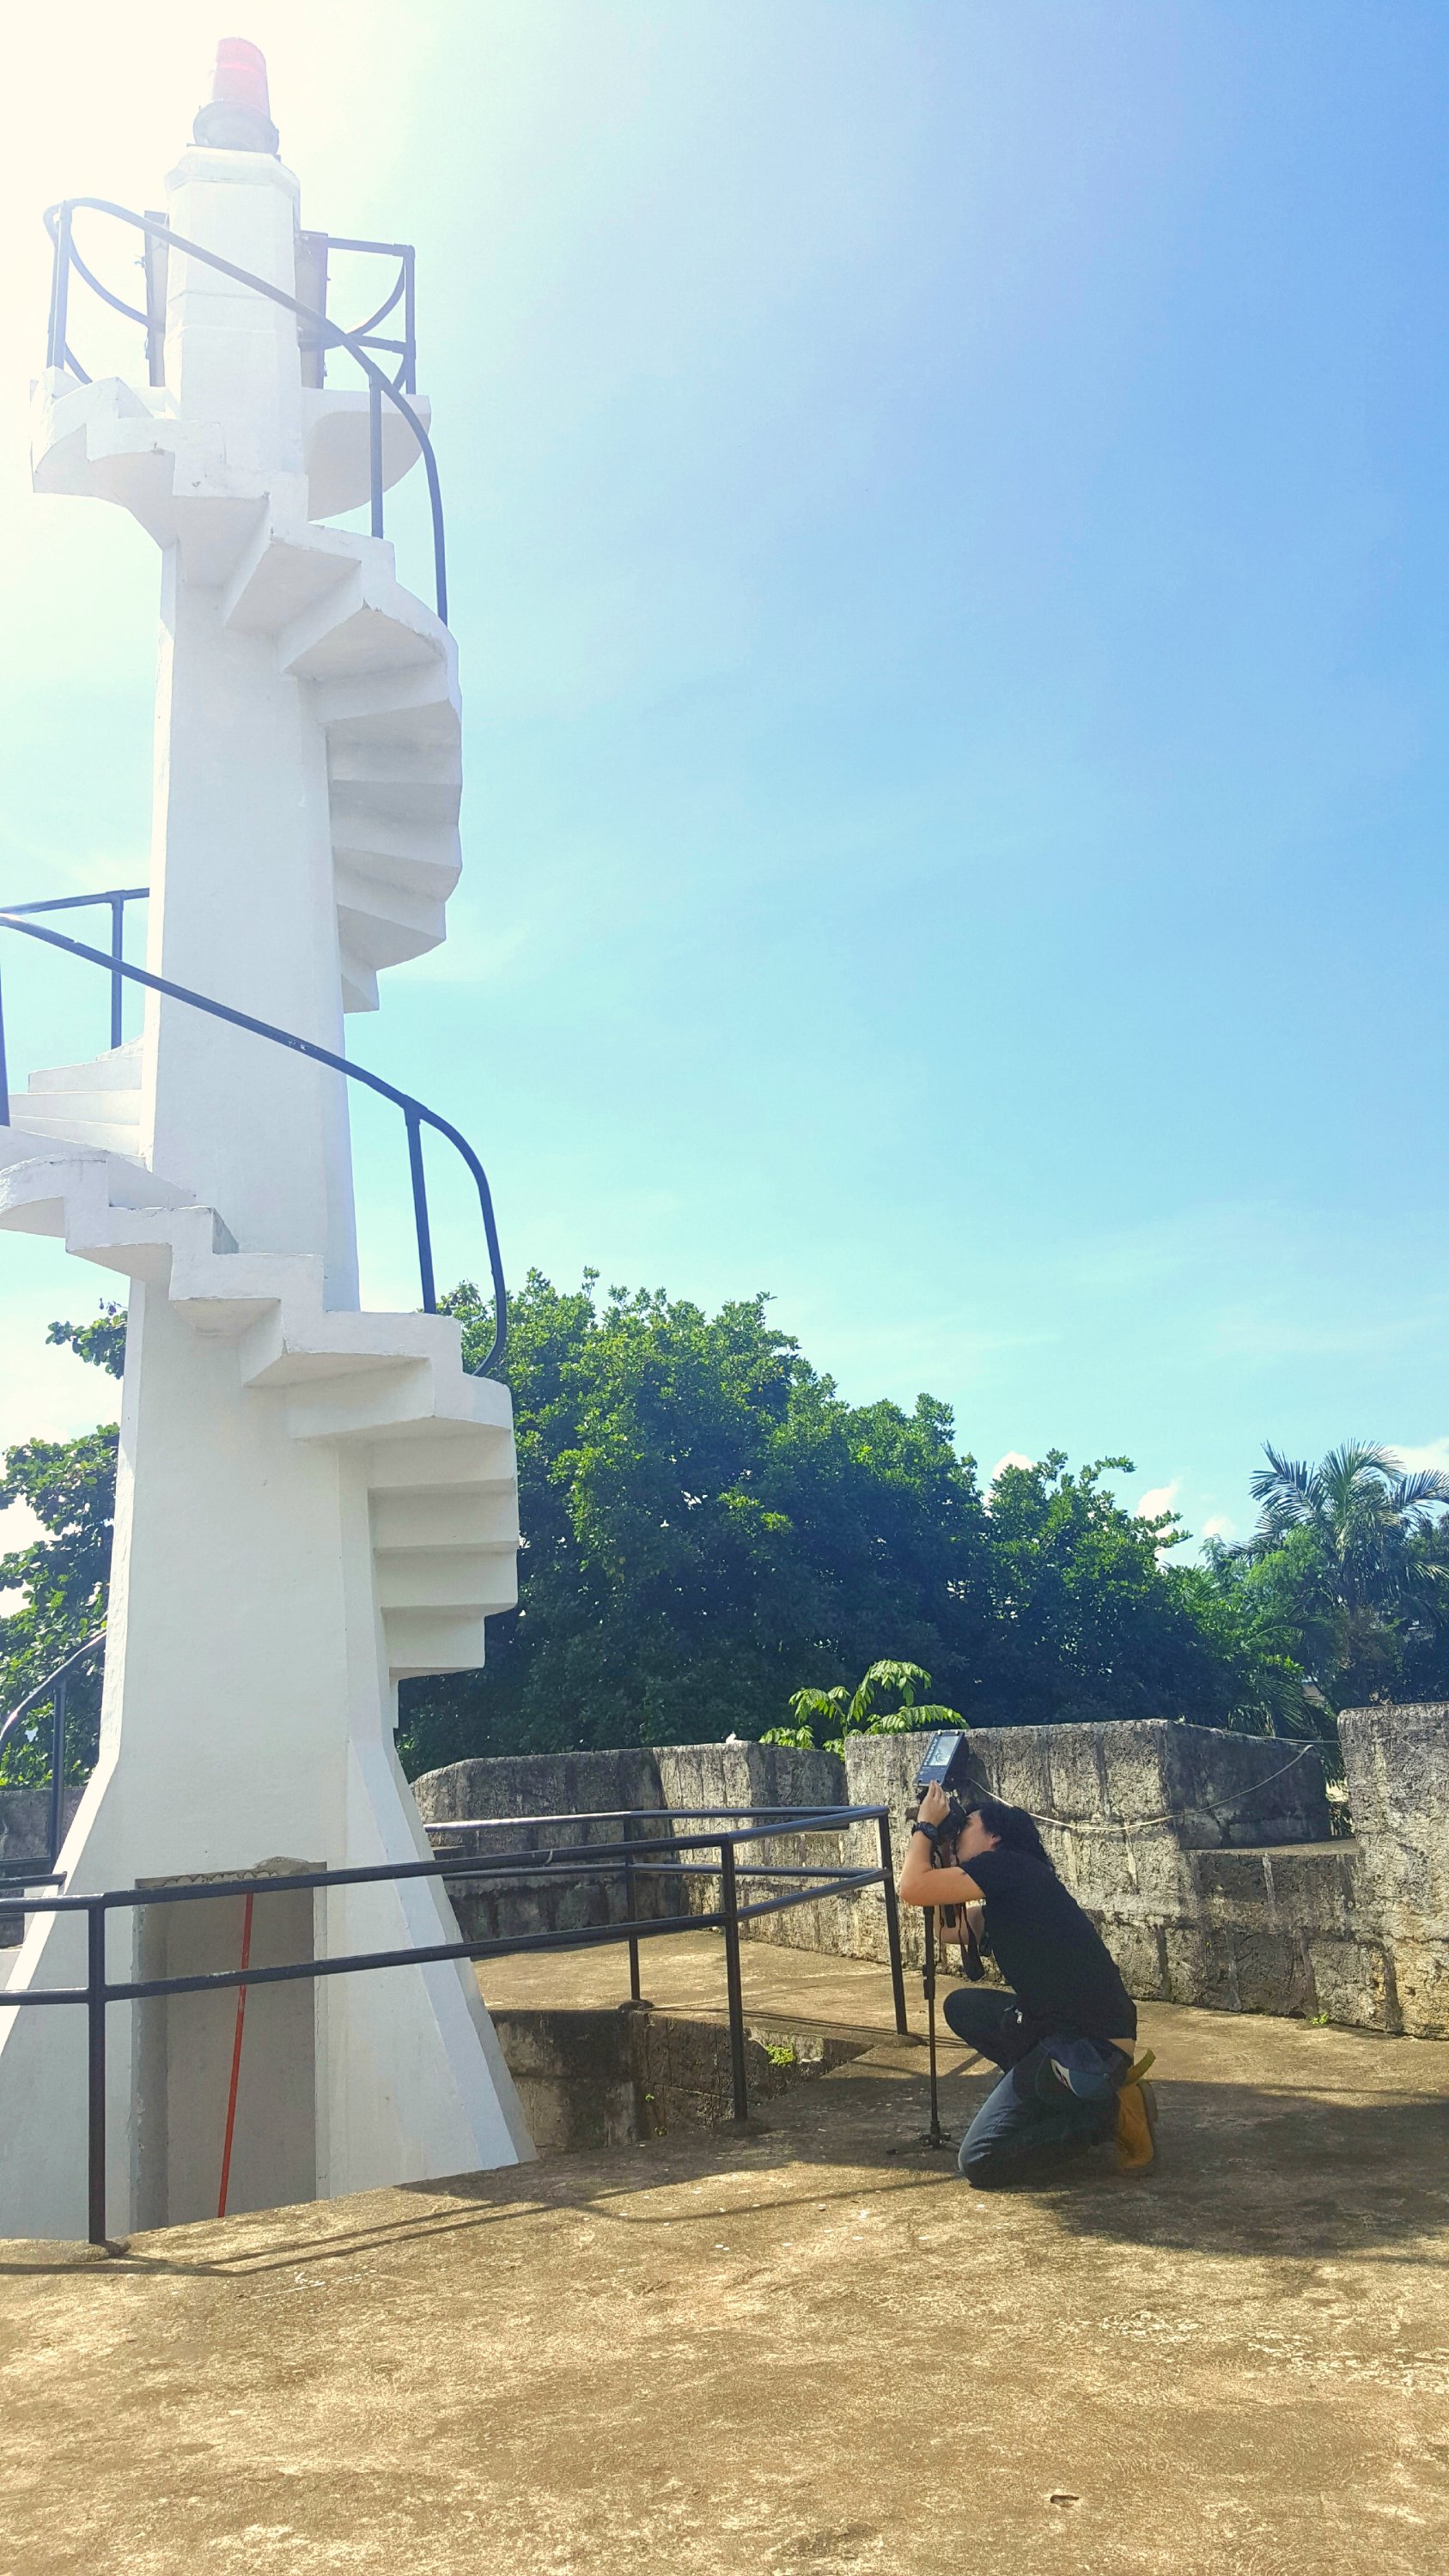 Me in my all-out effort to take a photo of the The Lighthouse of the Fuerte De La Concepcion Y Del Triunfo of Cotta Fort in Ozamiz City